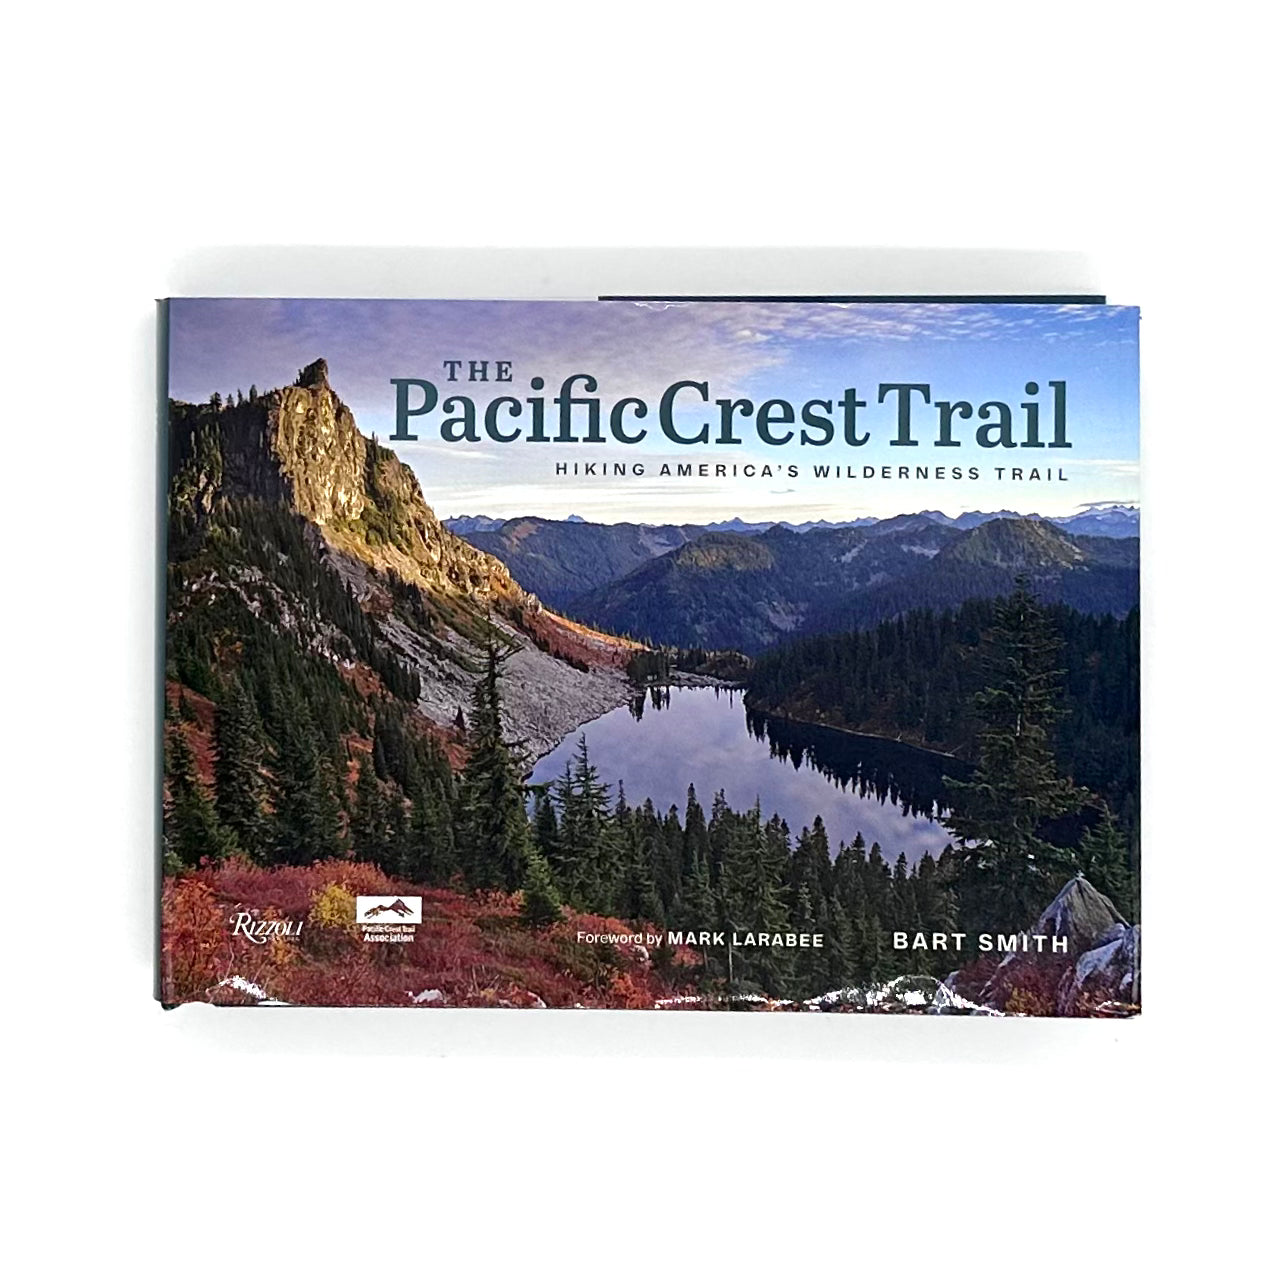 The Pacific Crest Trail - Bart Smith